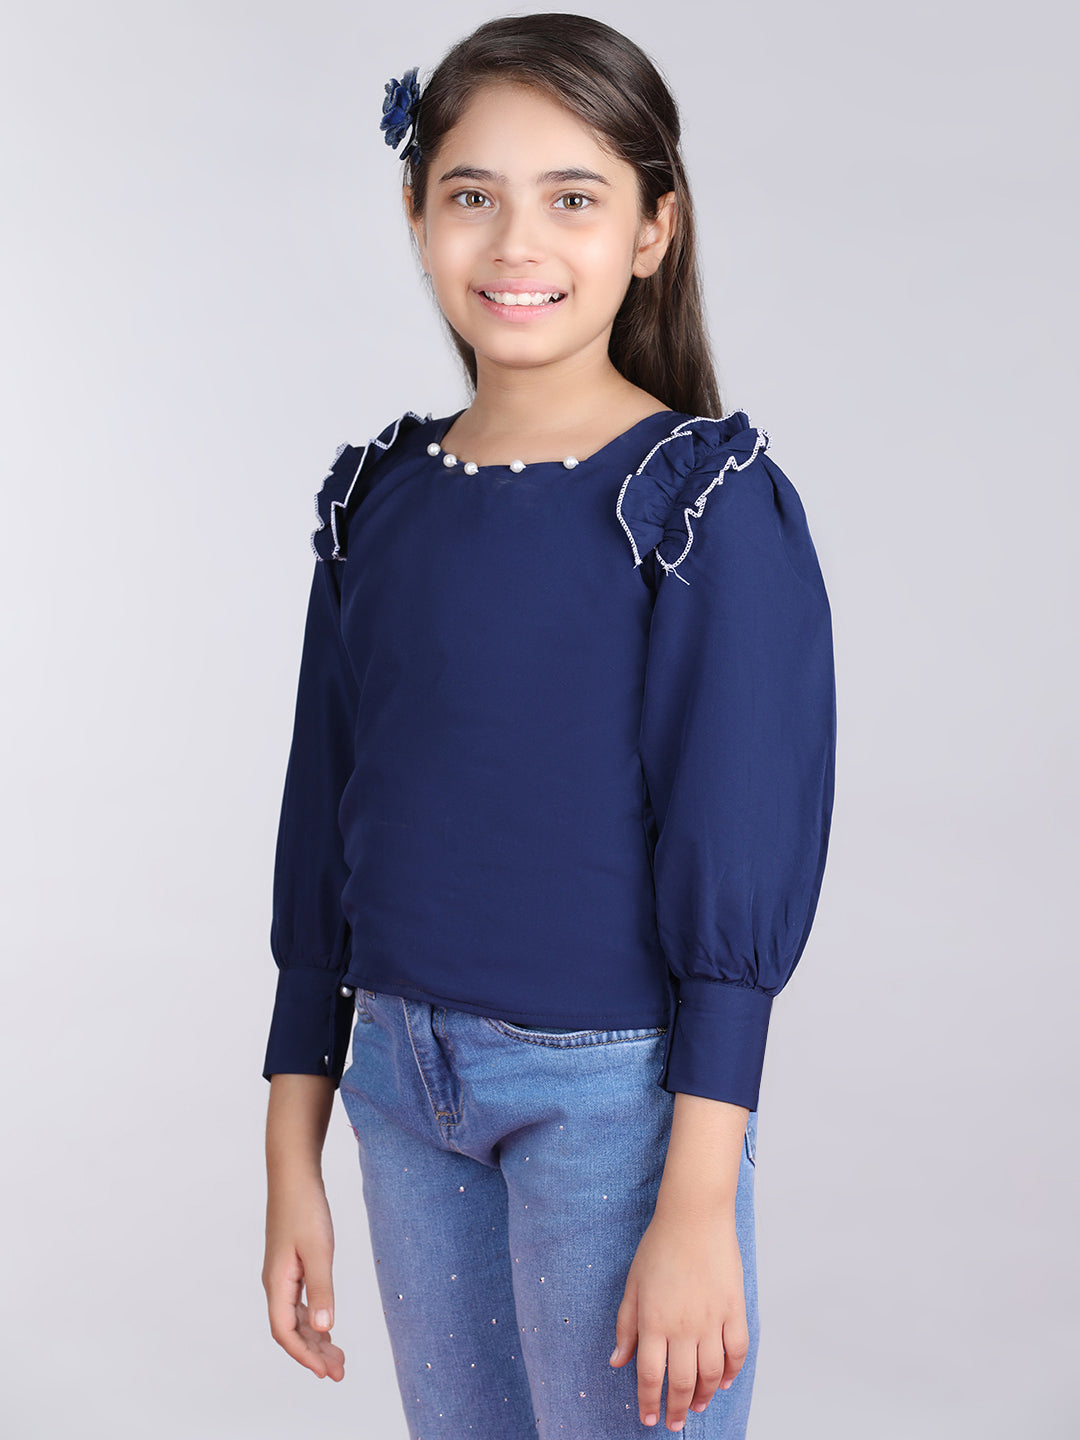 Cutiekins Solid Full Sleeves Polyester Tops-Teal Blue & White